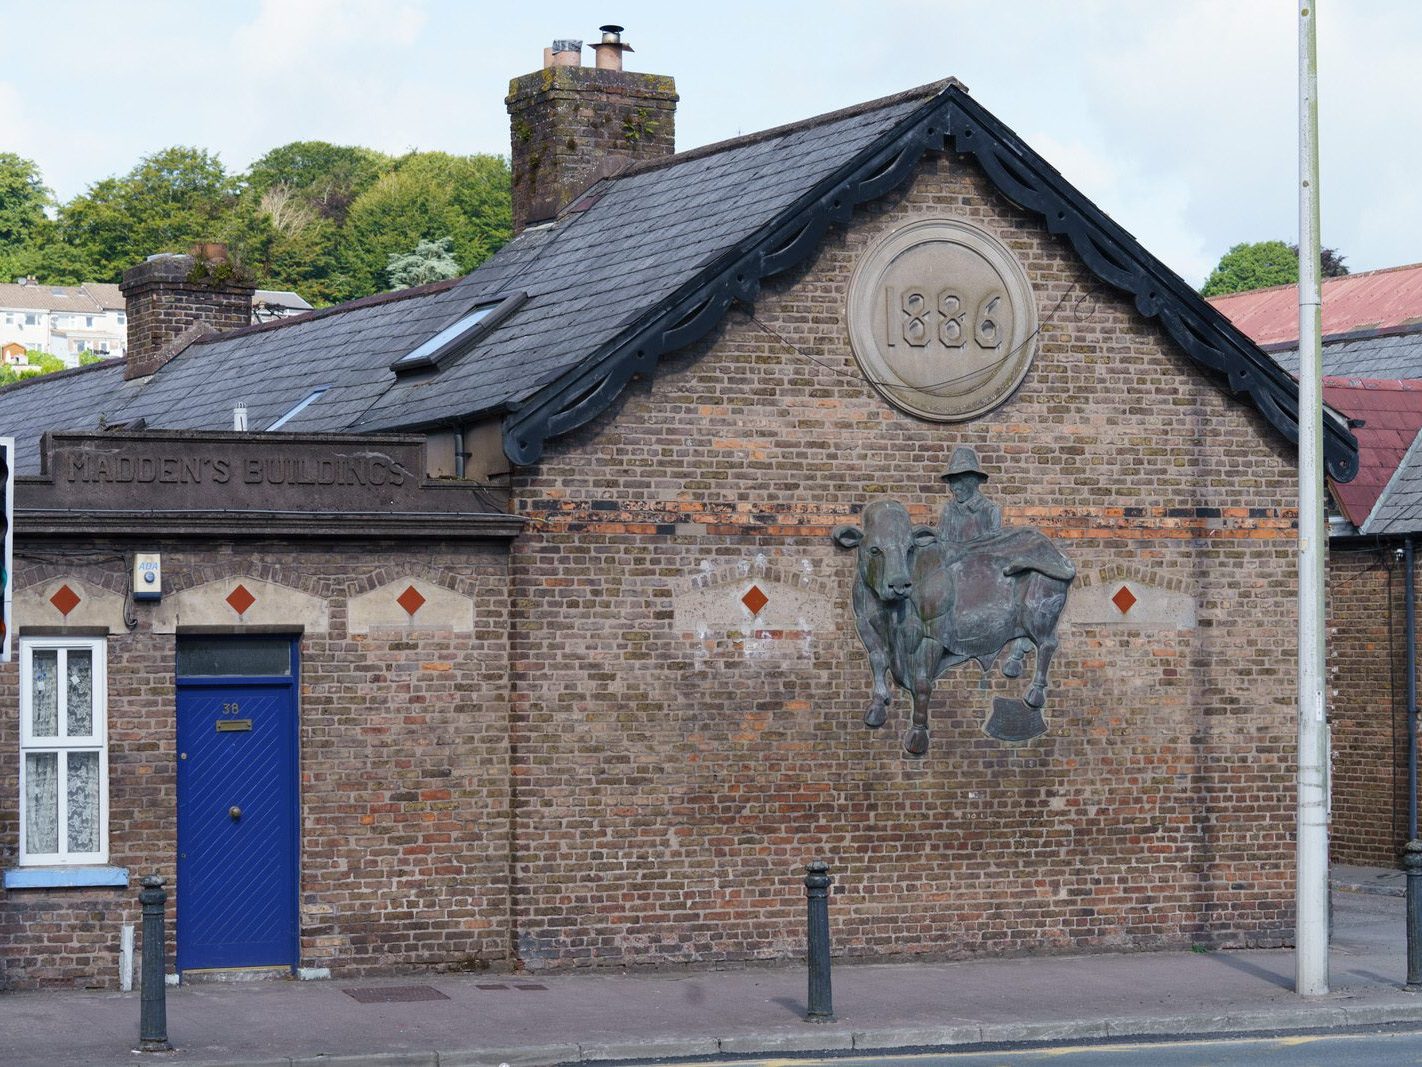 THE BULL AND DROVER BY KEVIN HOLLAND [AT MADDEN'S BUILDINGS ON WATERCOURSE ROAD IN CORK] 001